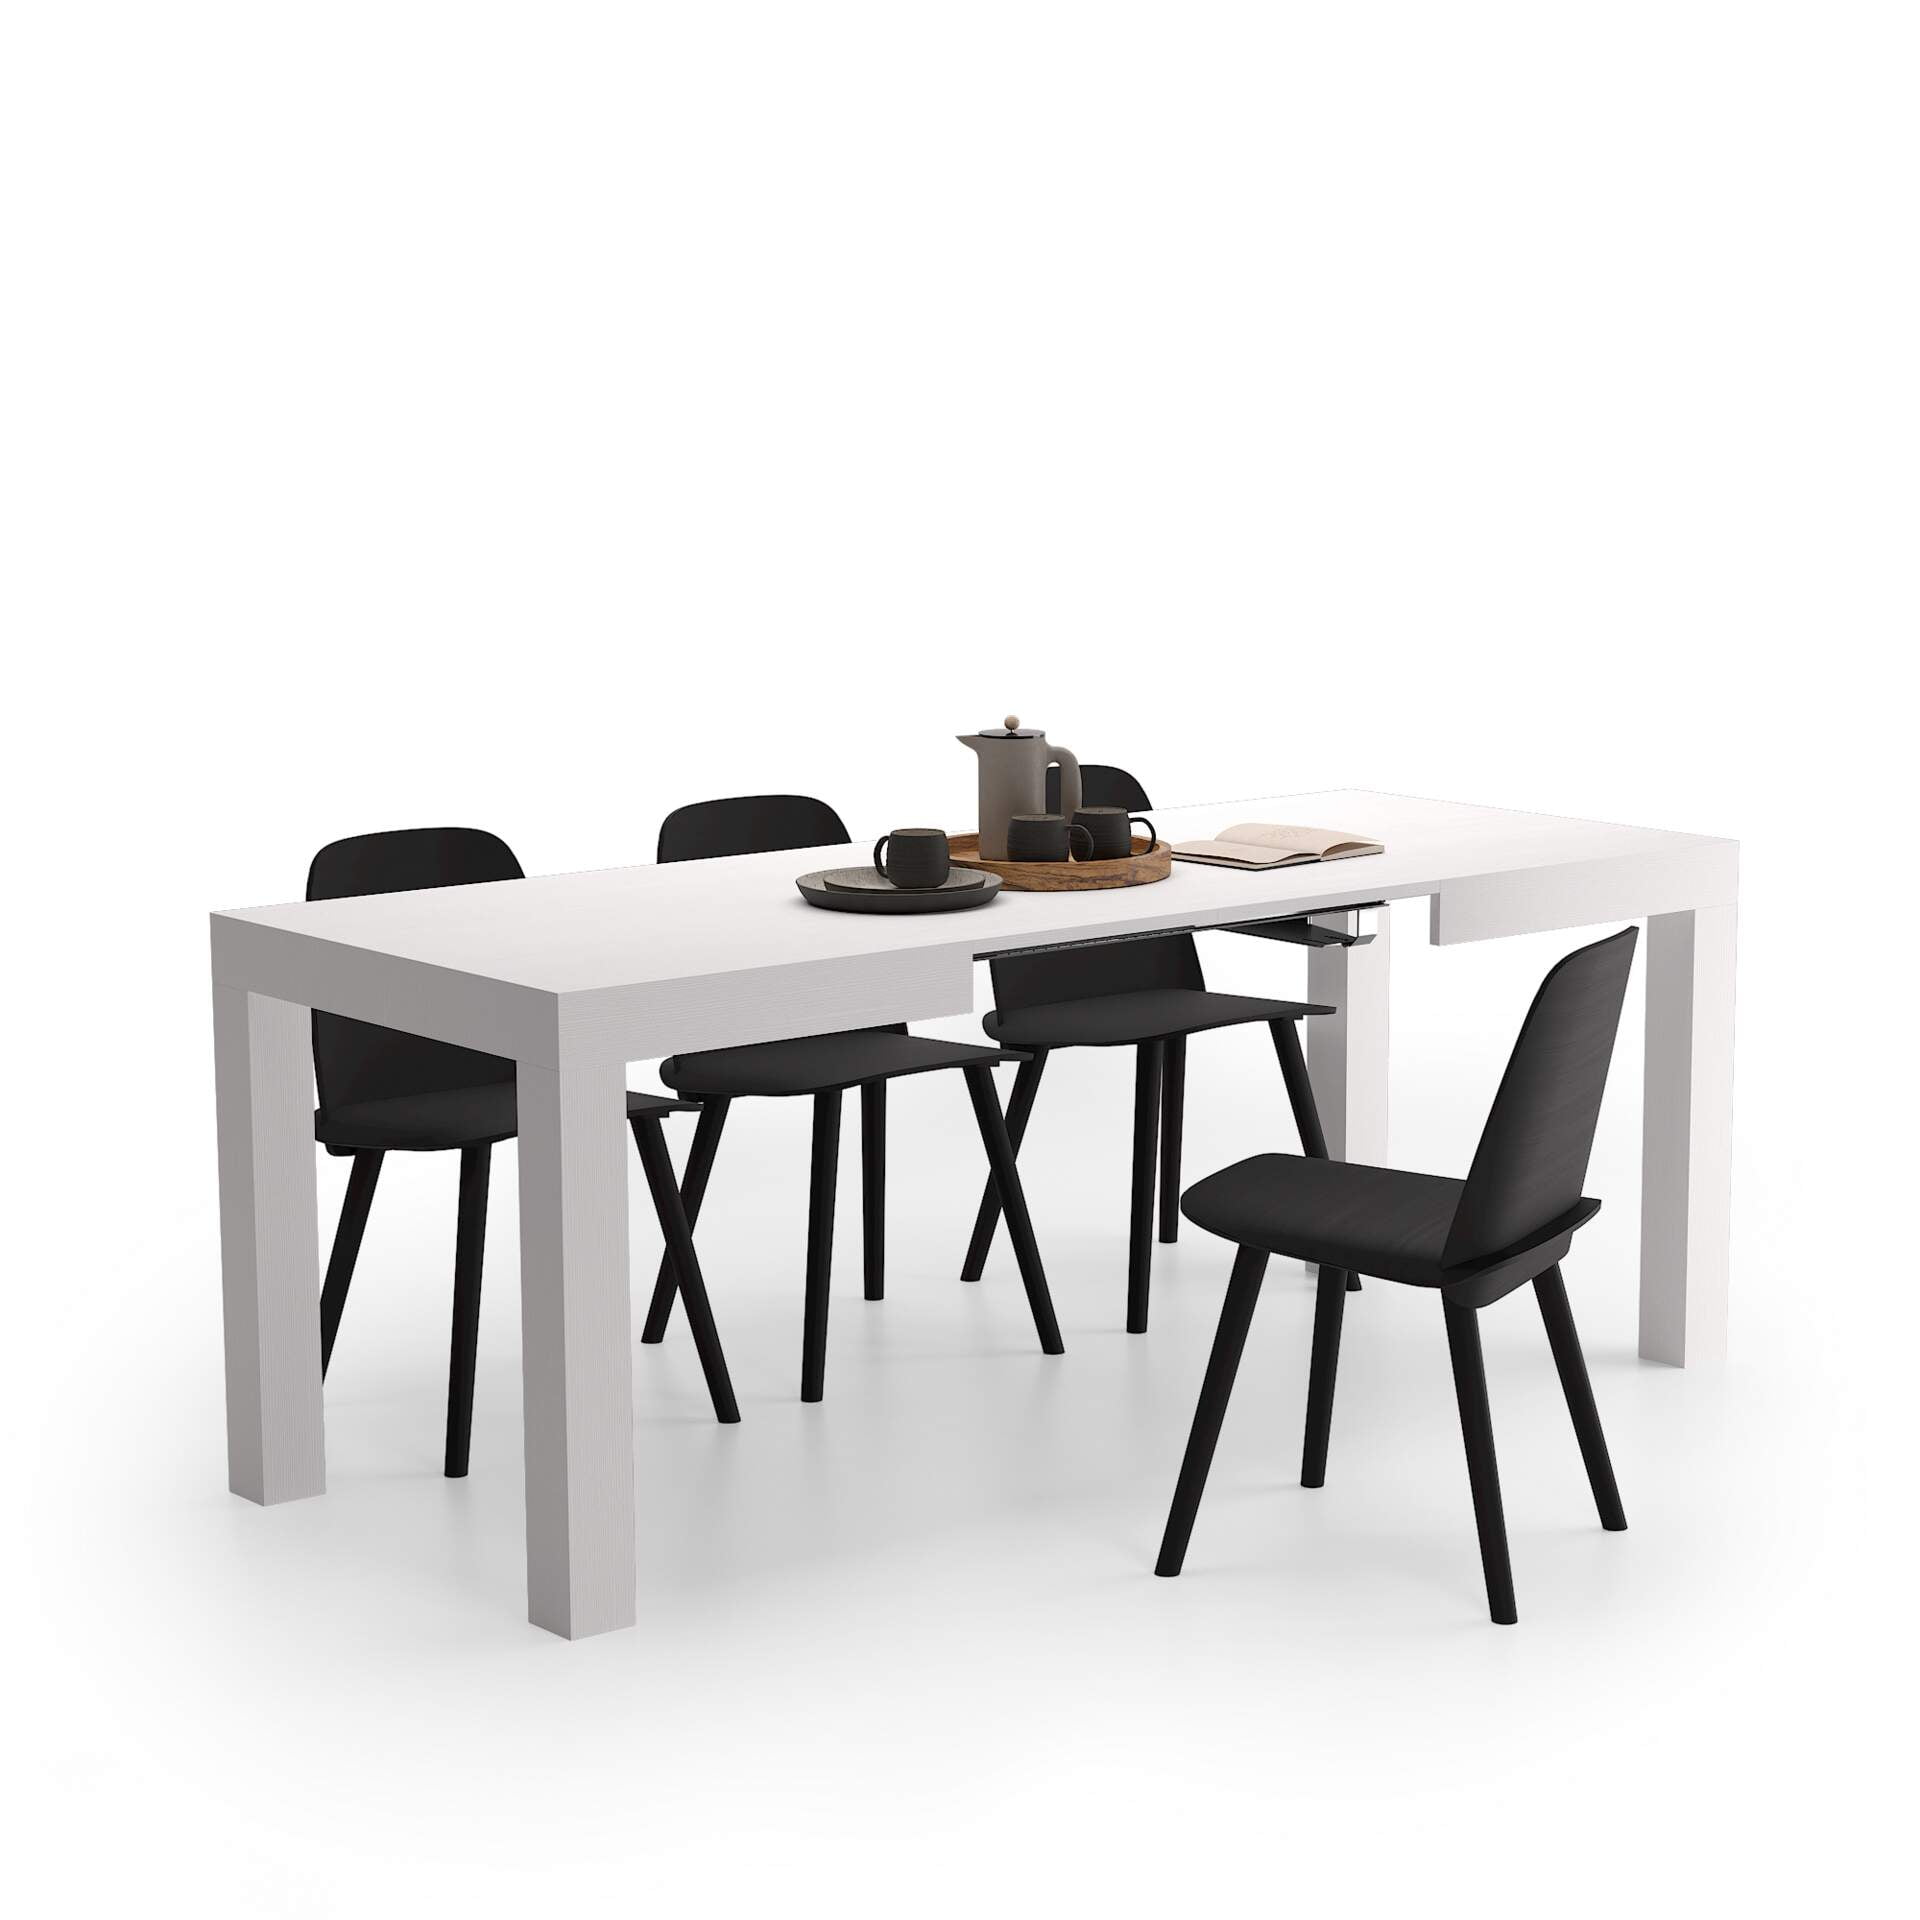 Mobili Fiver, First Extendable Table, High Gloss White, Made In Italy